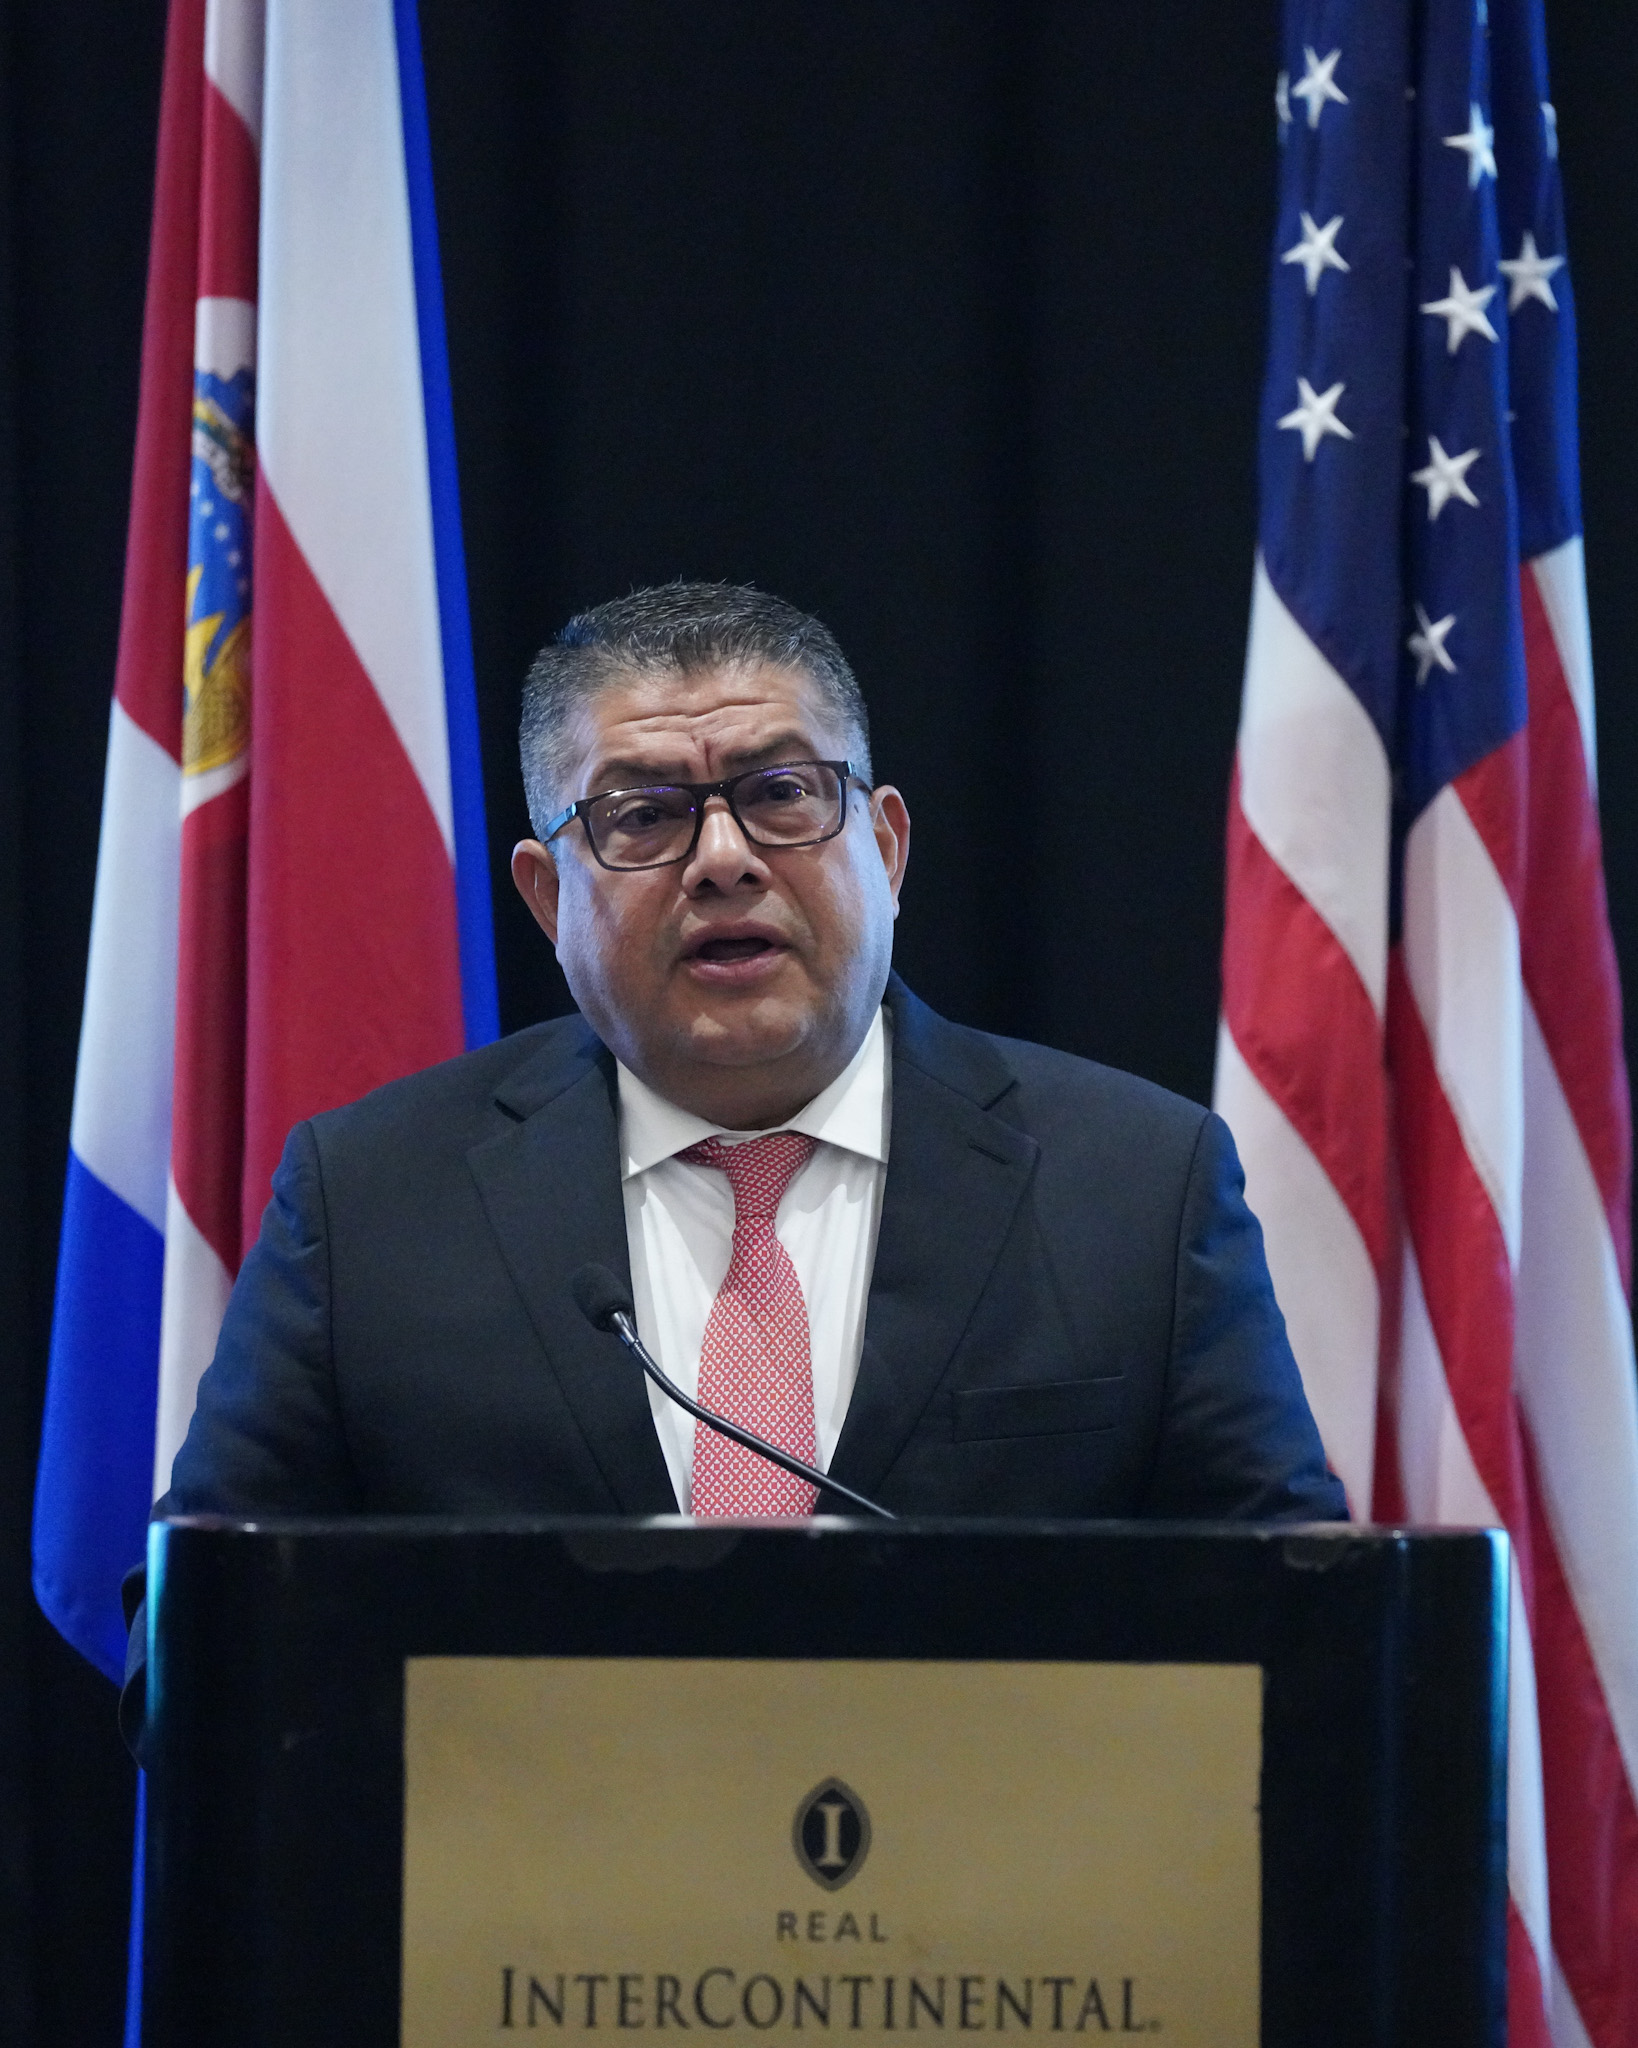 Costa Rica Bets on Interagency Coordination to Combat Crime